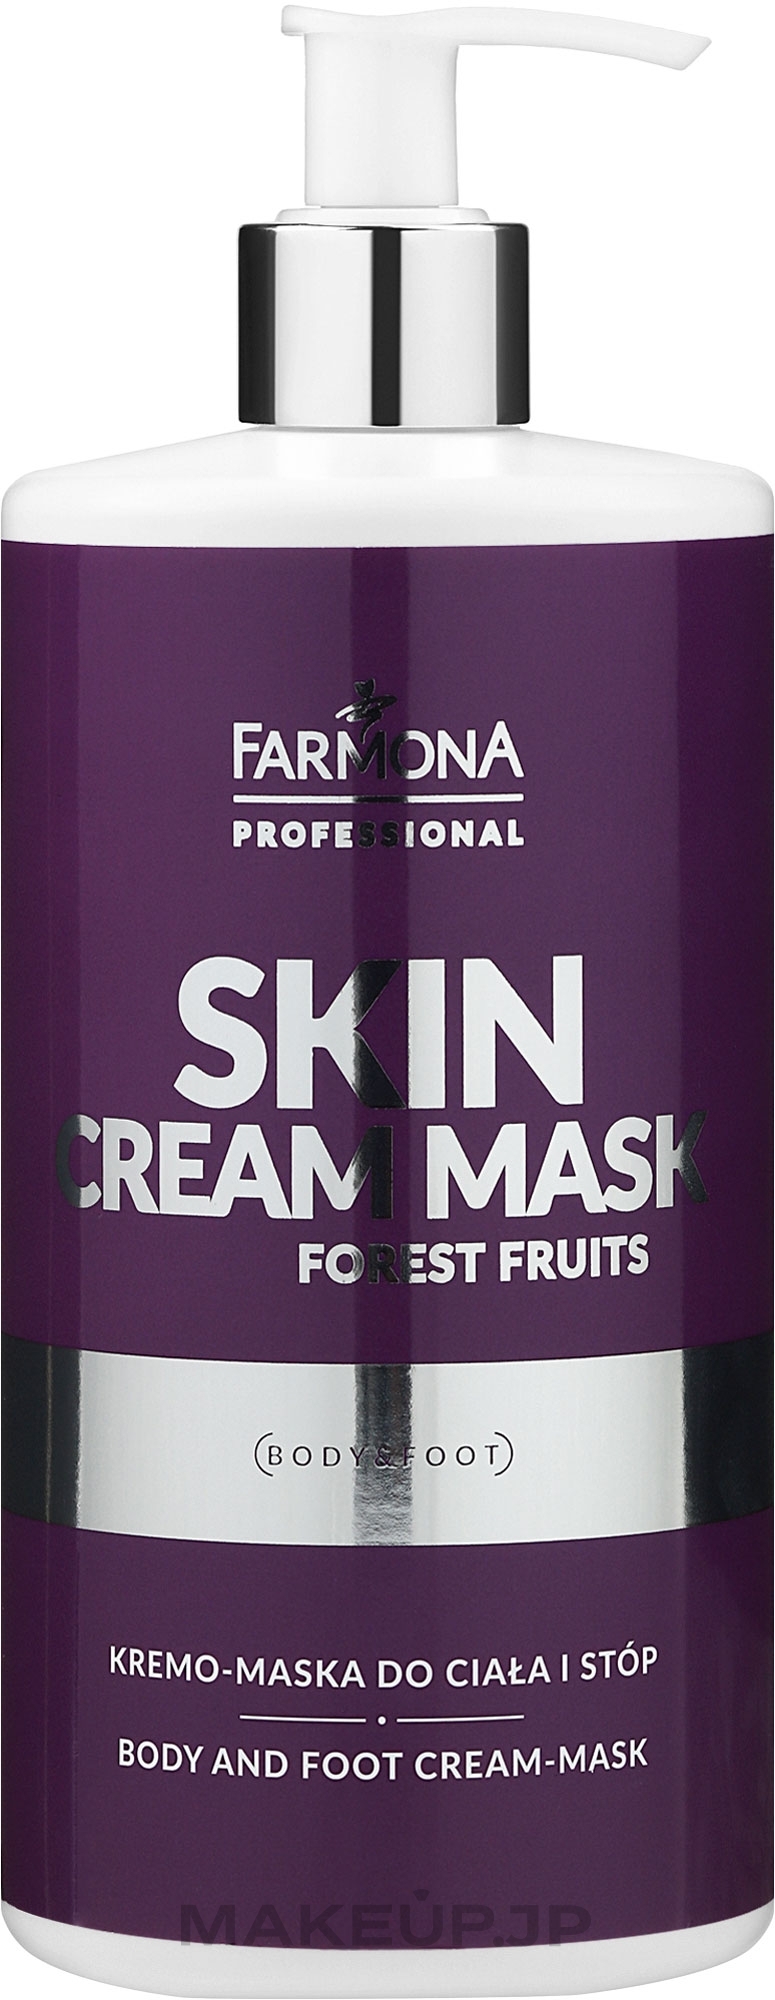 Body & Foot Cream Mask with Wild Berry Scent - Farmona Professional Skin Cream Mask Forest Fruits — photo 500 ml